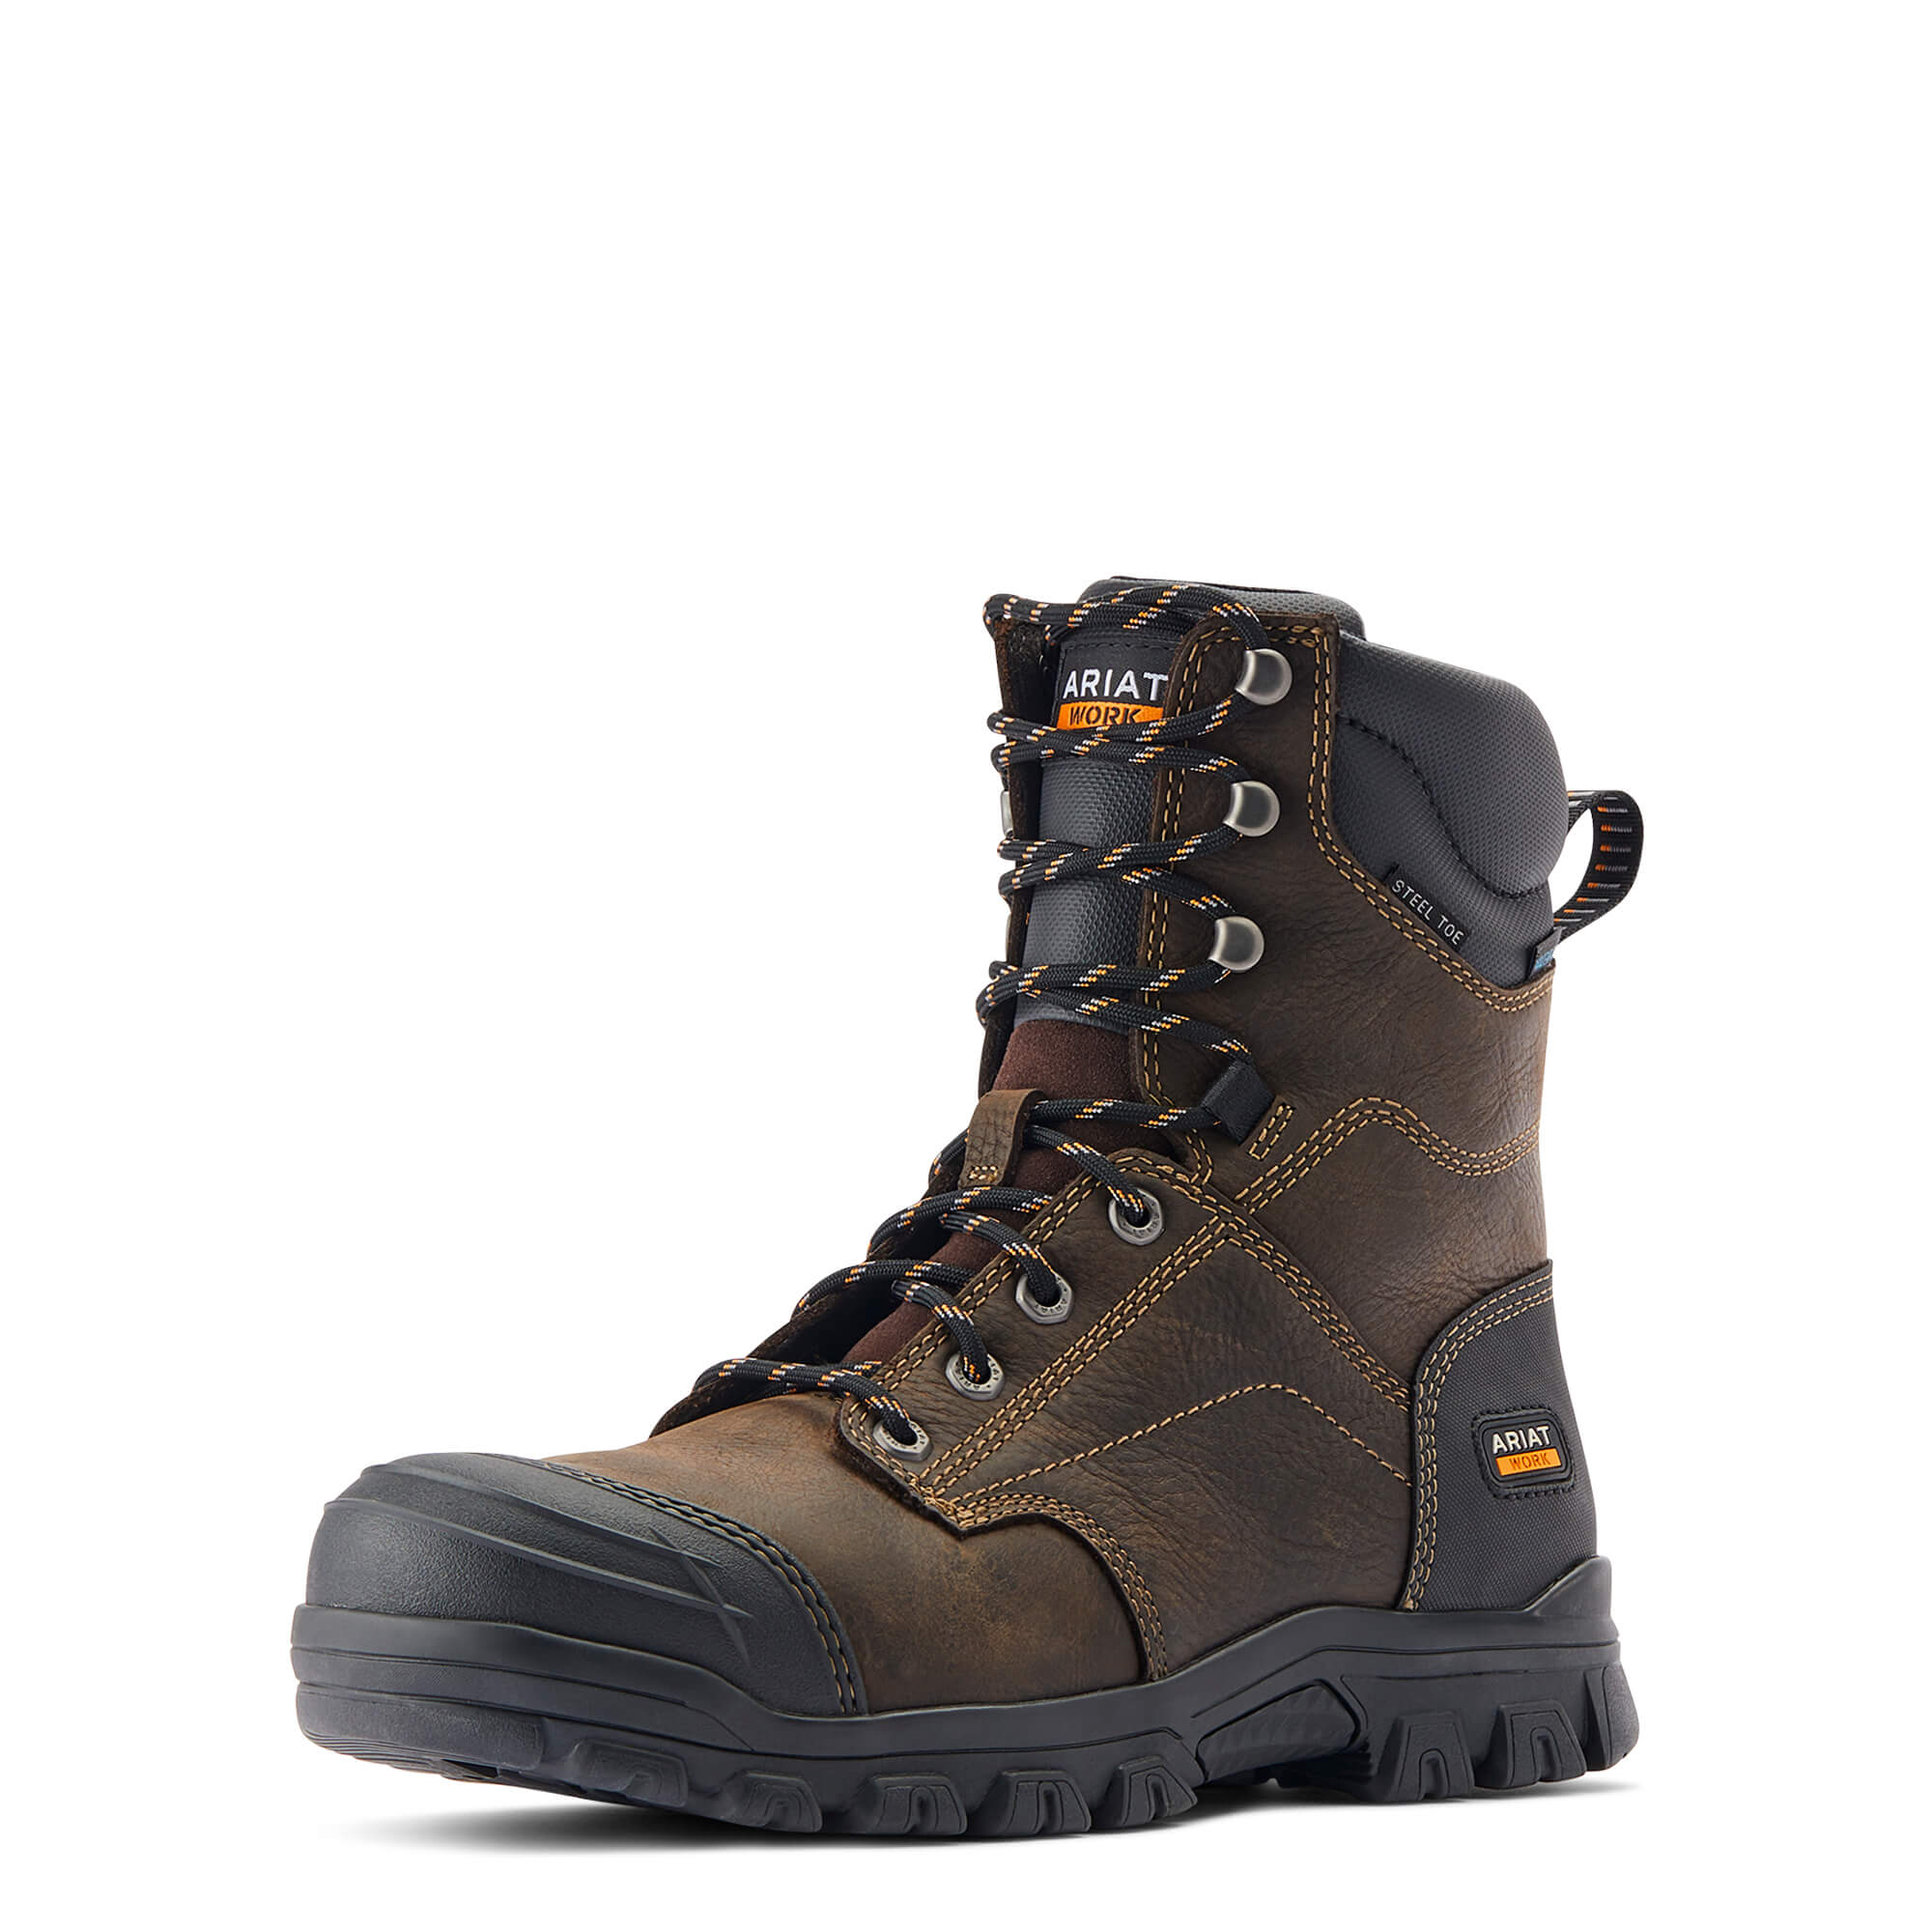 Top Brands for Steel Toe Work Boots - Work Boots HQ